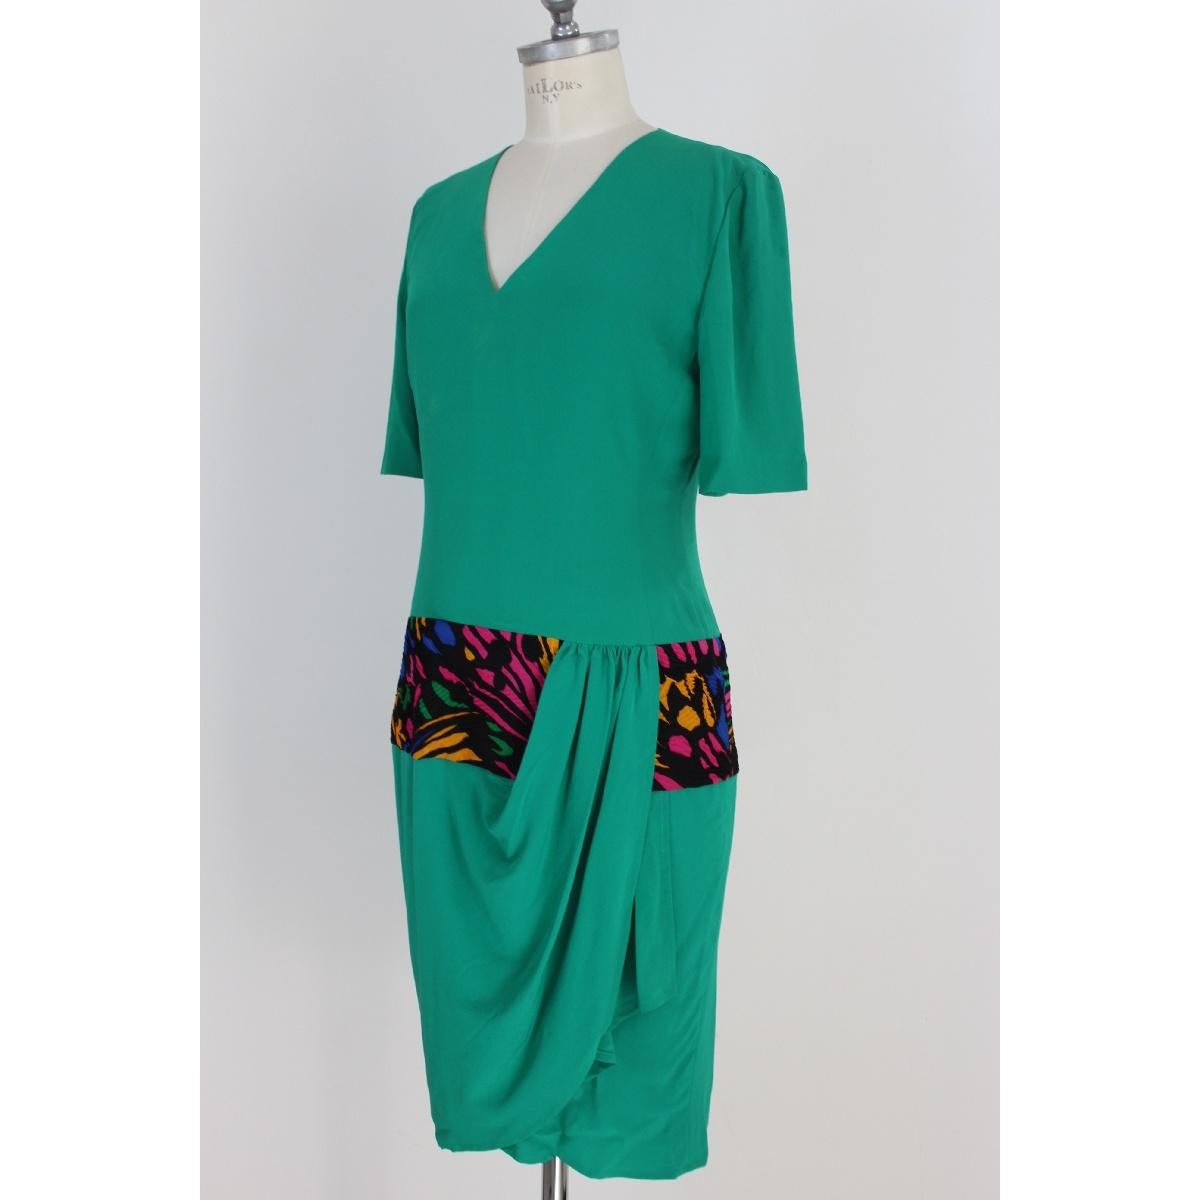 Mila Schon vintage silk dress. Green color, with multicolored band. Pleated. New with label. Made in Italy.

Size: 44 IT 10 US 12 UK

Shoulders: 44 cm
Bust / Chest: 48 cm
Sleeves: 30 cm
Length: 100 cm